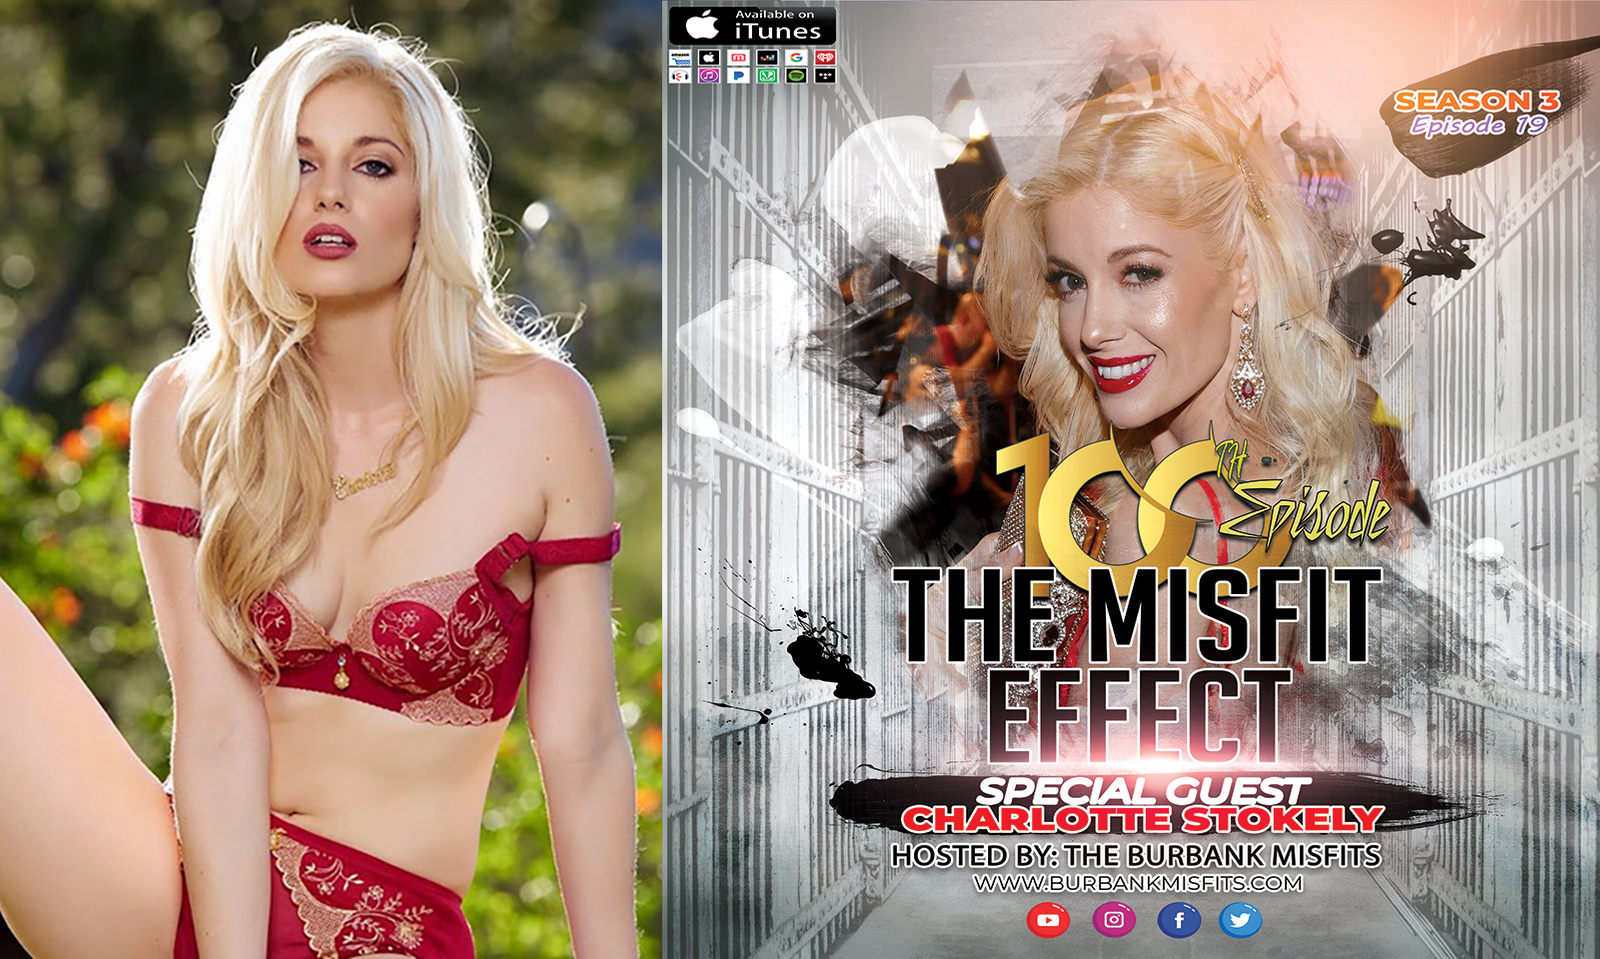 Charlotte Stokely Interviewed on Burbank Misfits' 100th Podcast